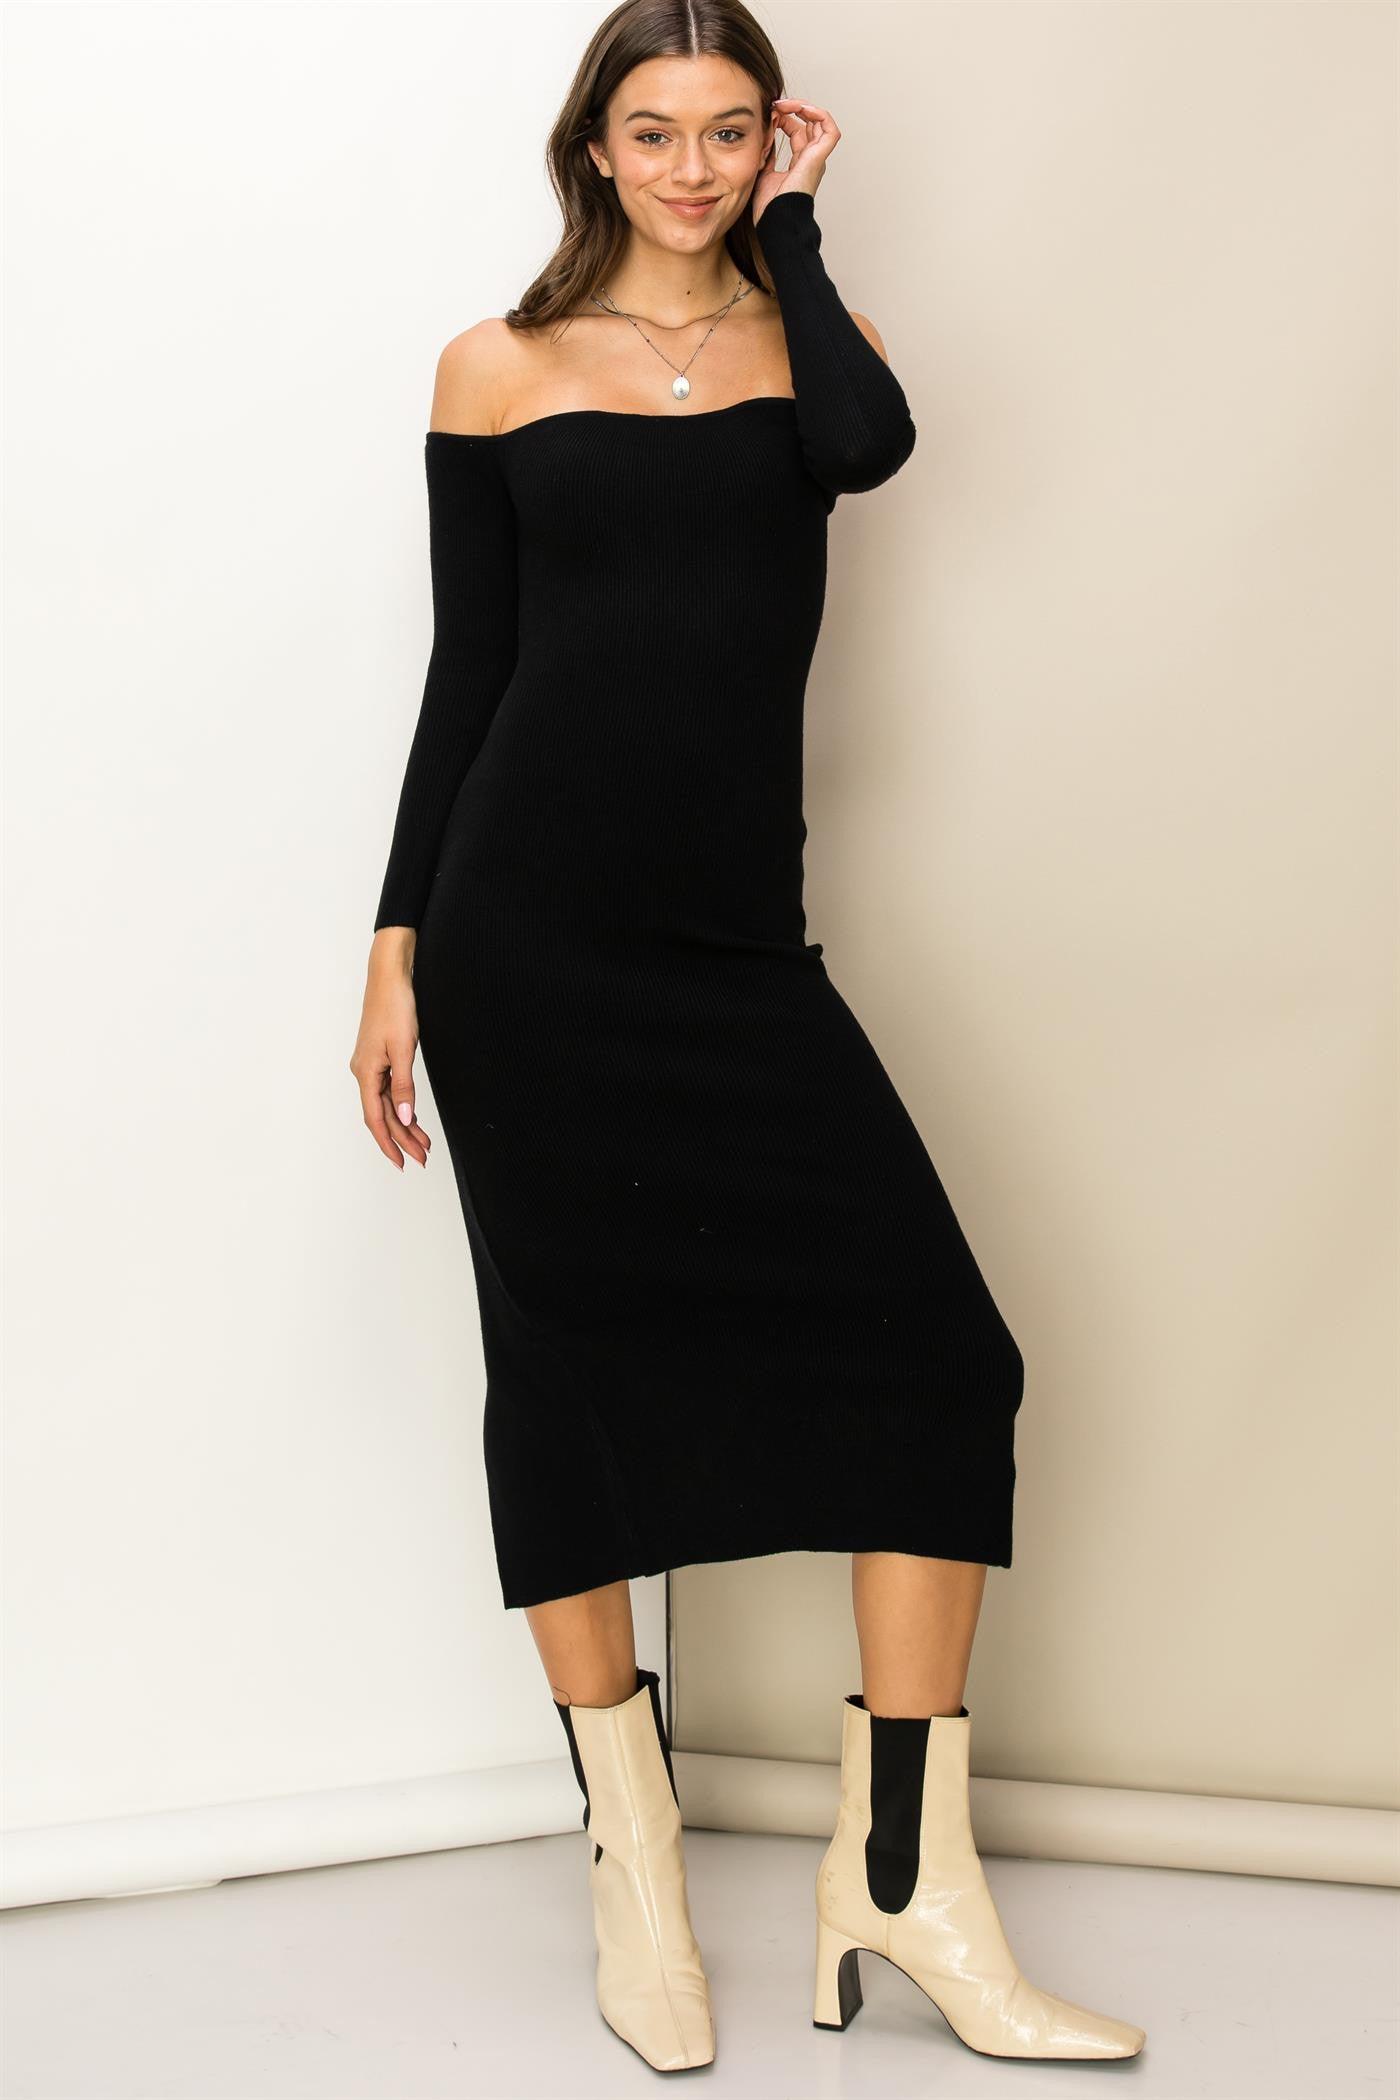 off the shoulder ribbed knit dress - RK Collections Boutique